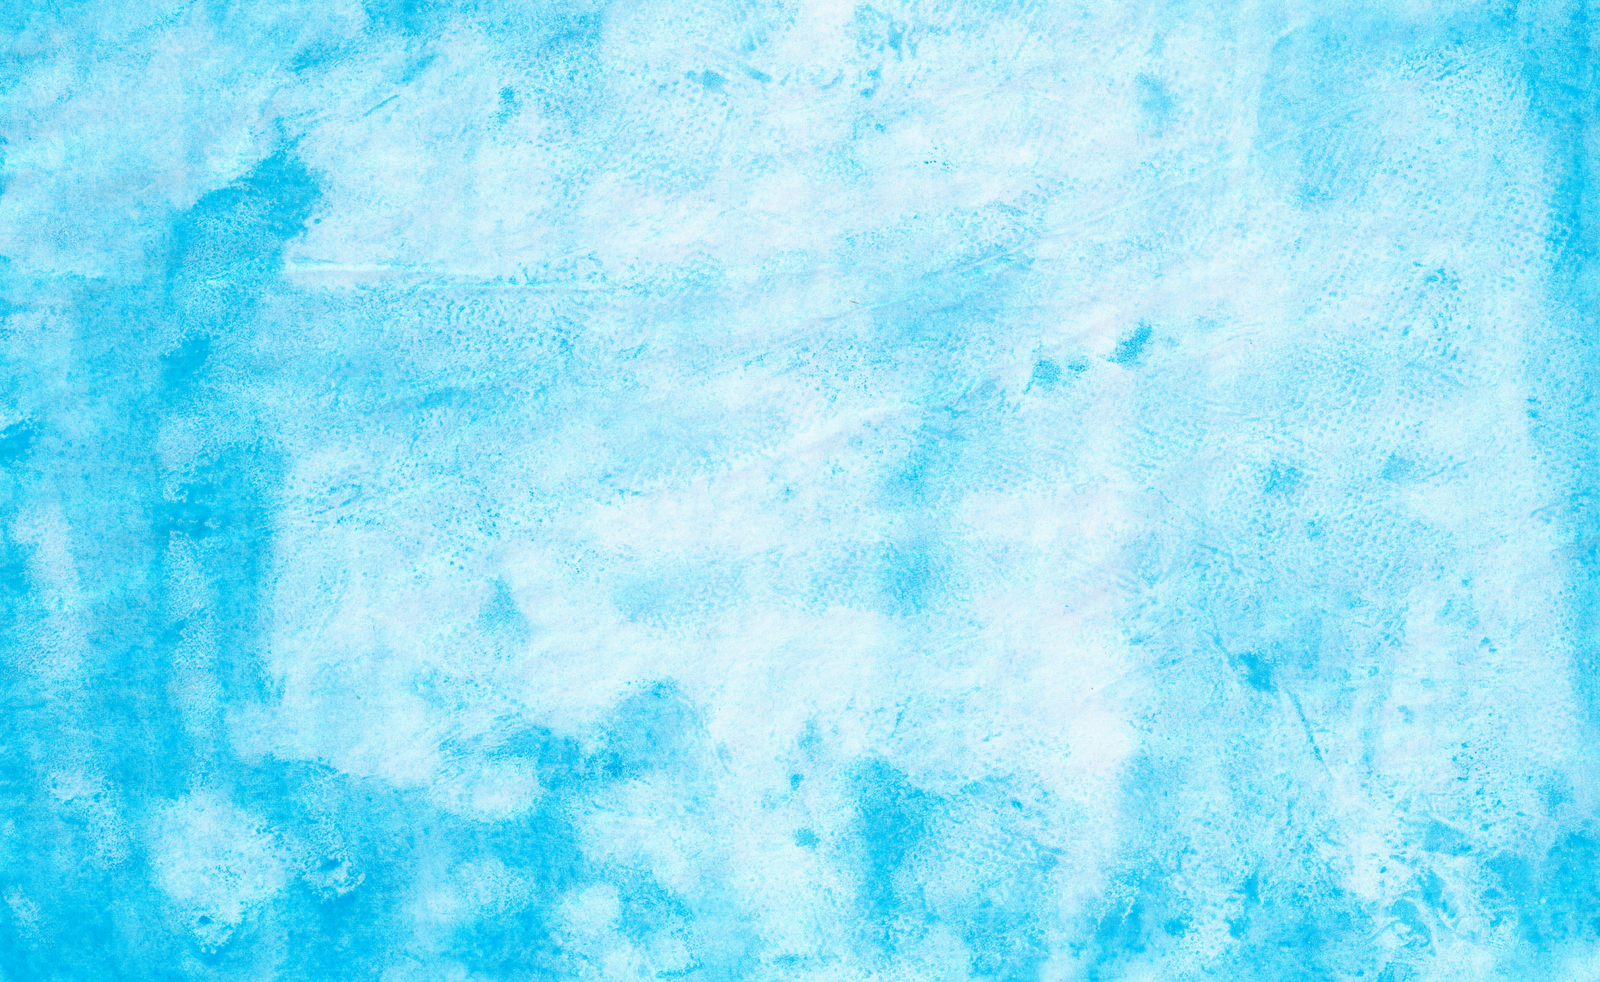 Grungy Bright Colored Blue Watercolor On Napkin Textures Reusage